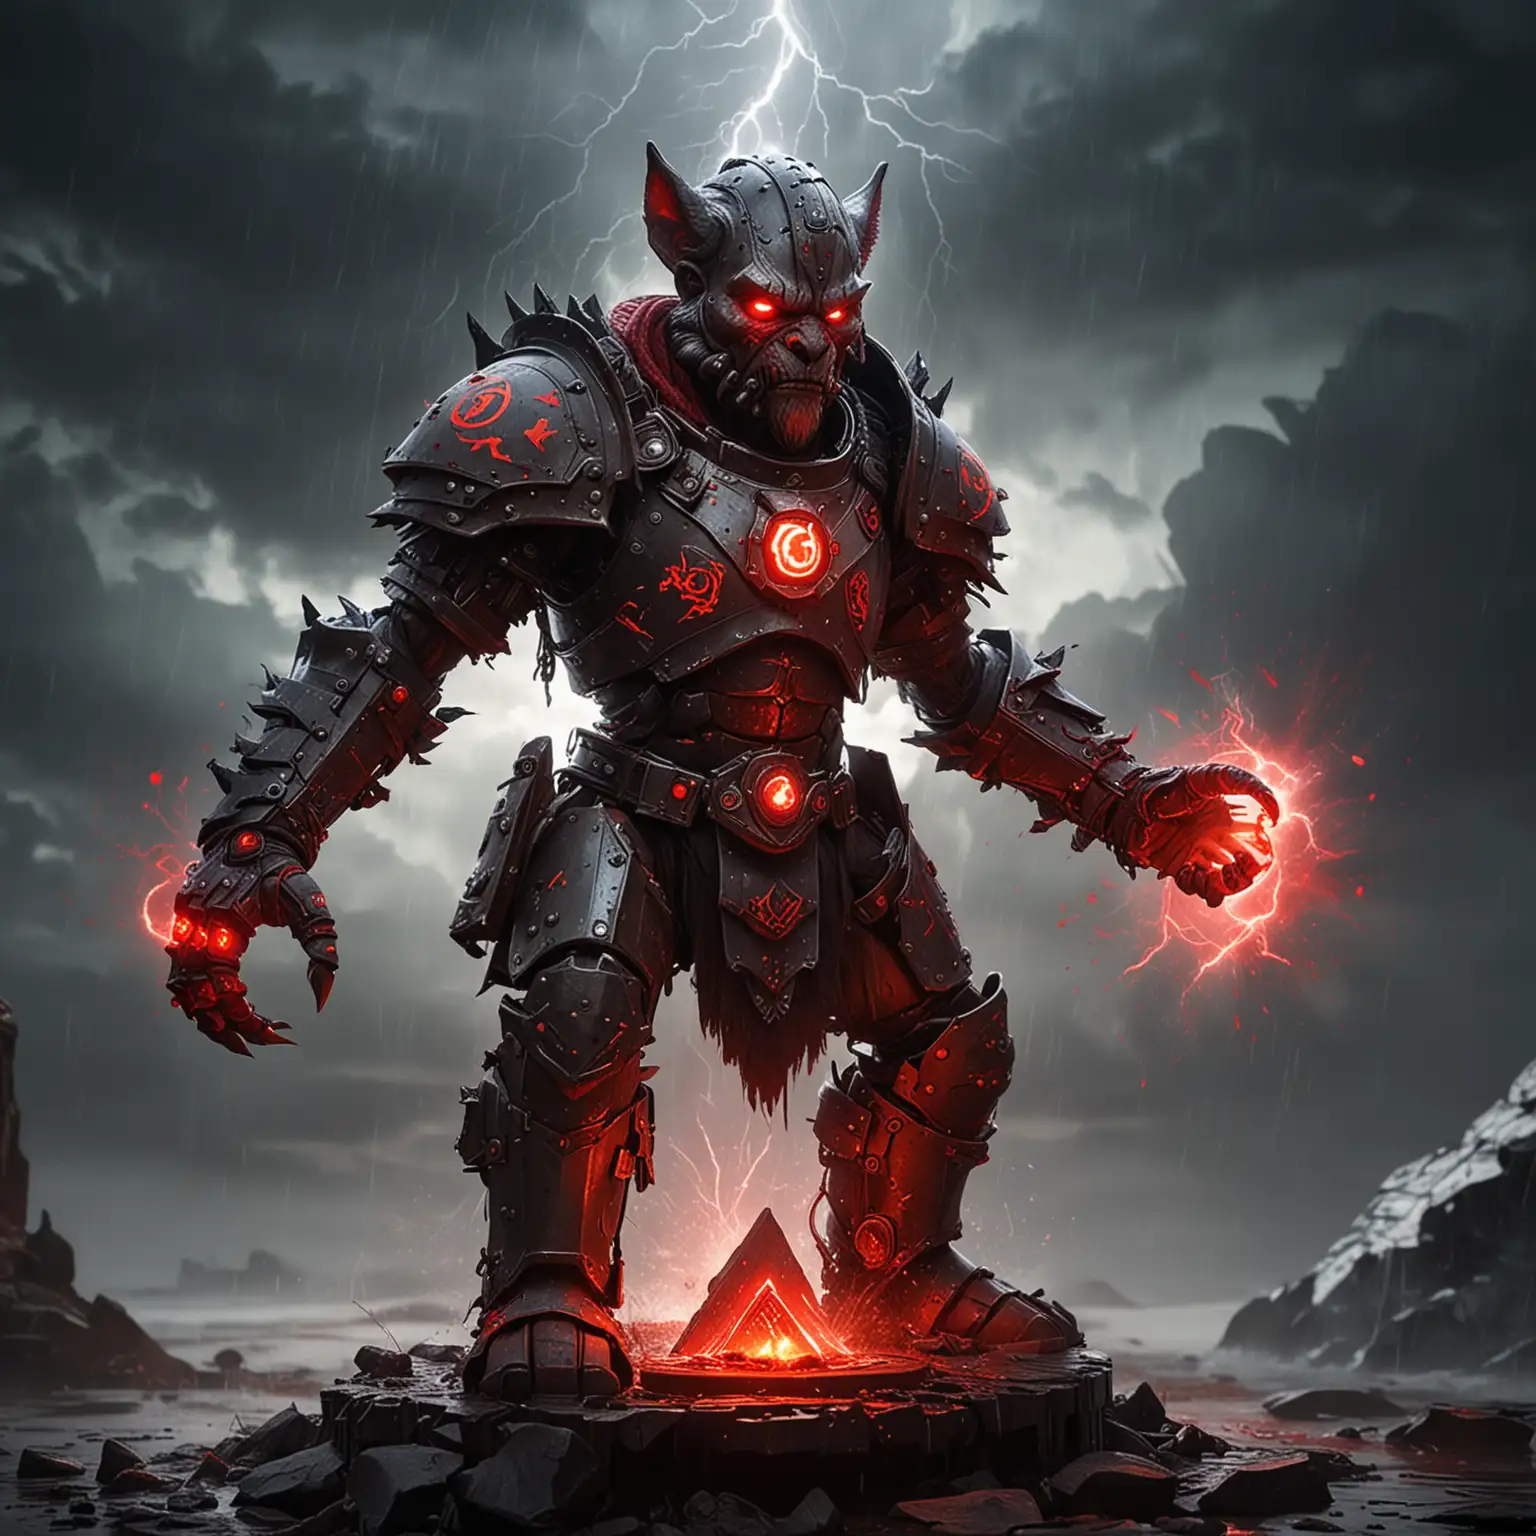 a robot werewolf-gnome cyborg wearing ancient plate armor painted with glowing red runes, powered and fueled by blood magic, with lightning energy surrounding the gauntlets, silhouetted by the morning dawn on a stormy day